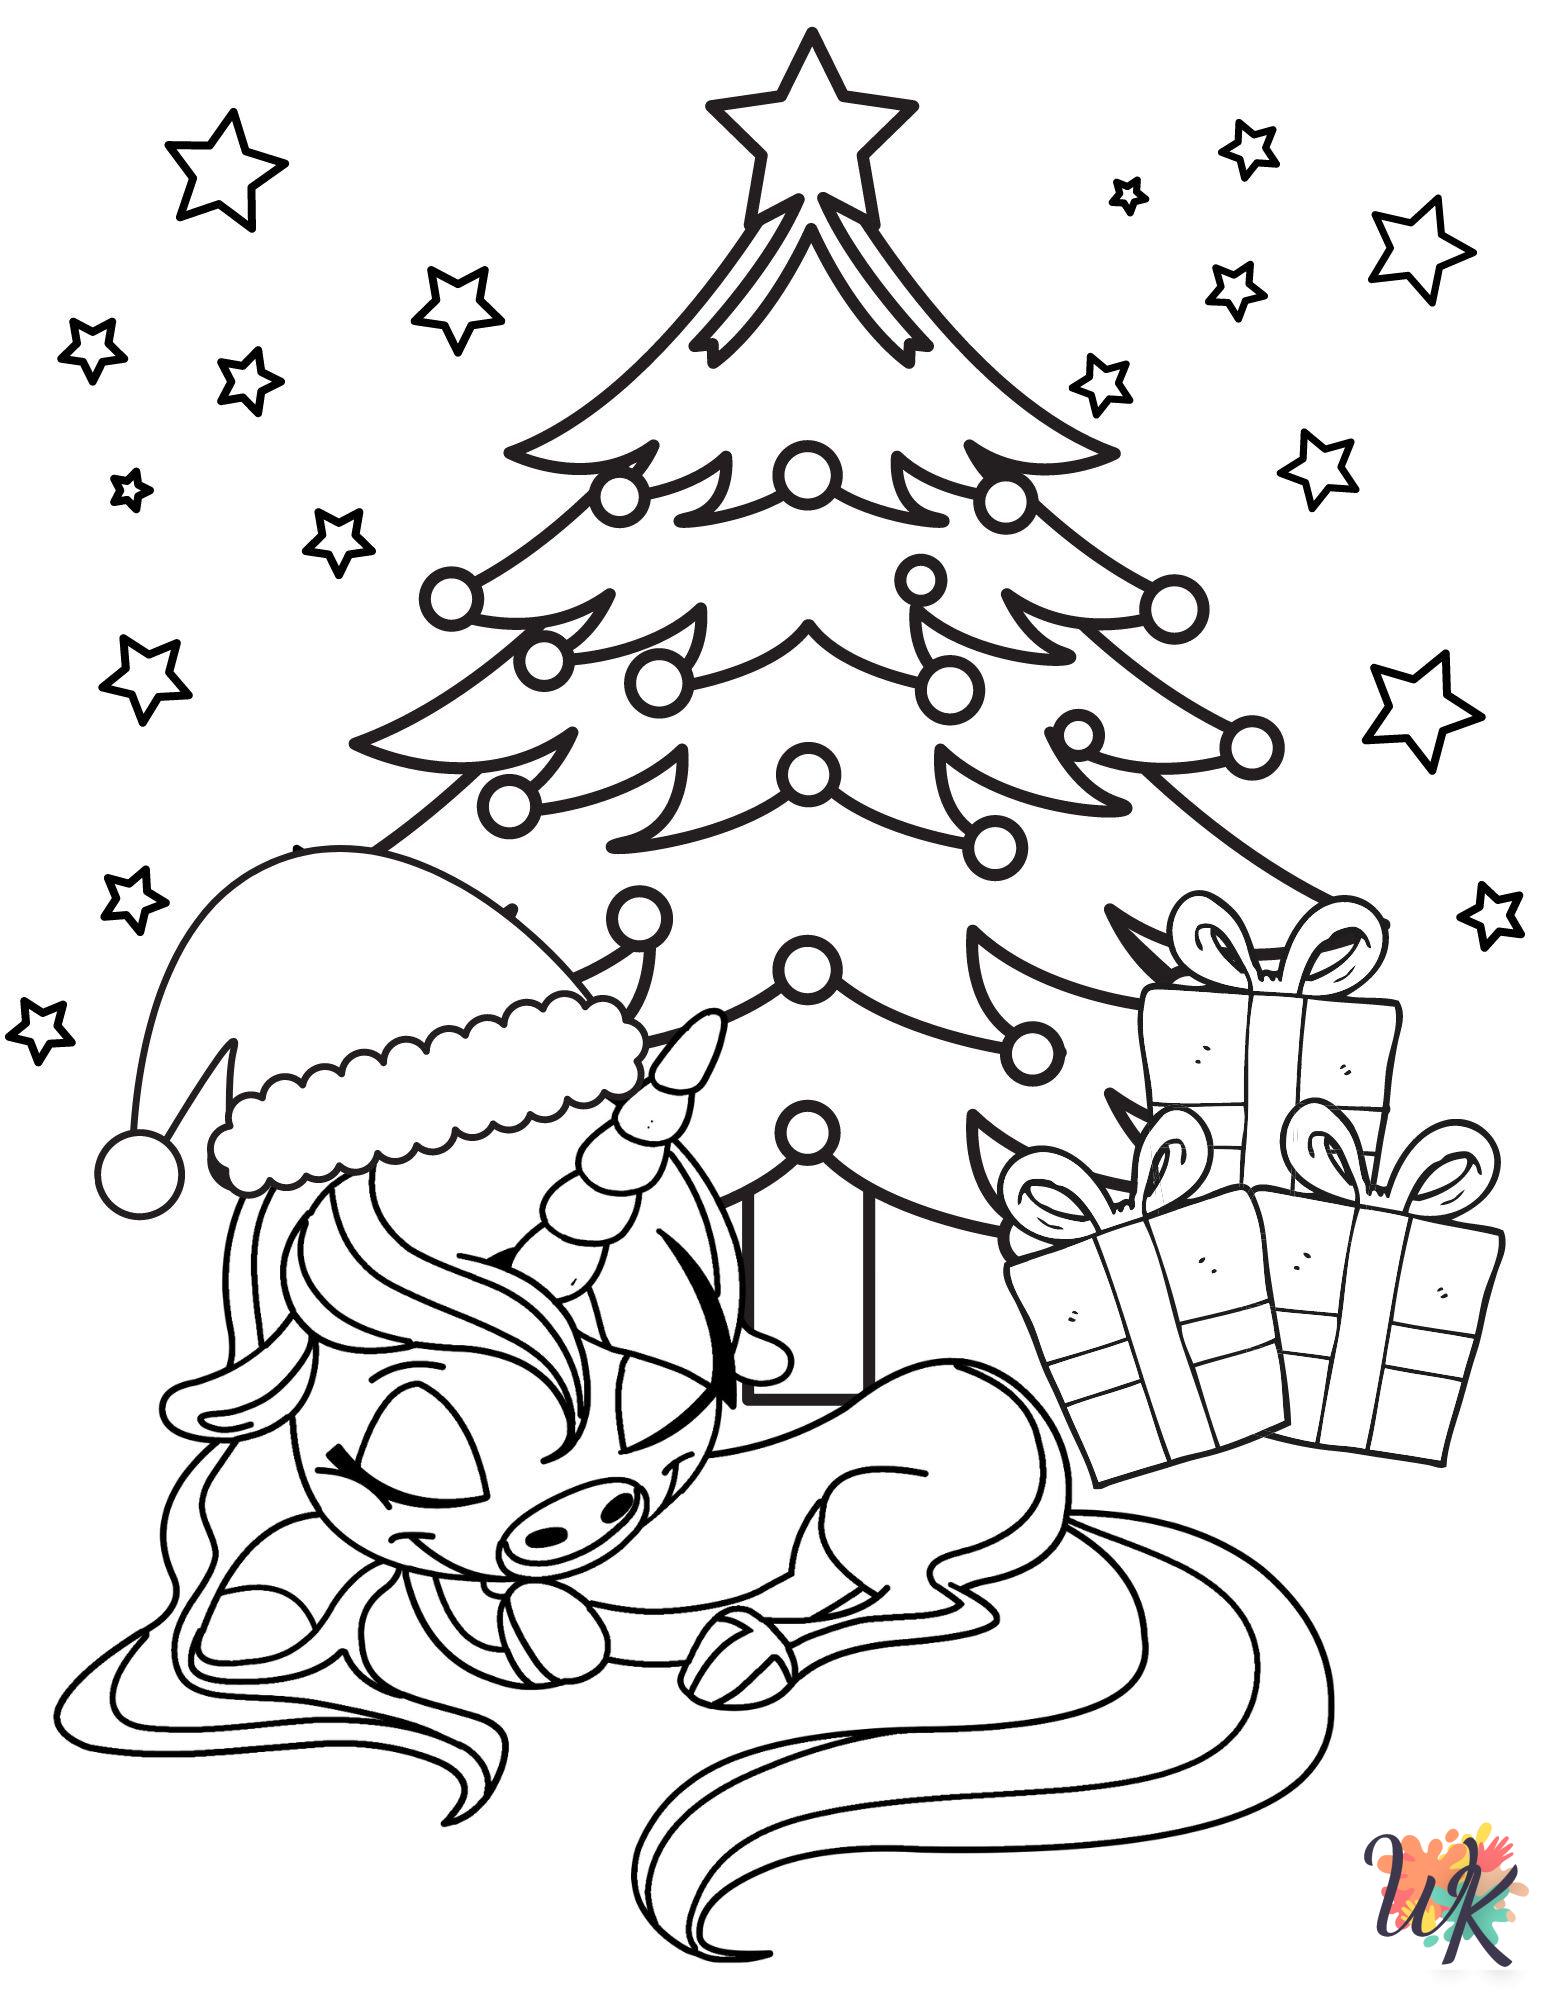 Christmas Unicorn coloring pages for adults easy